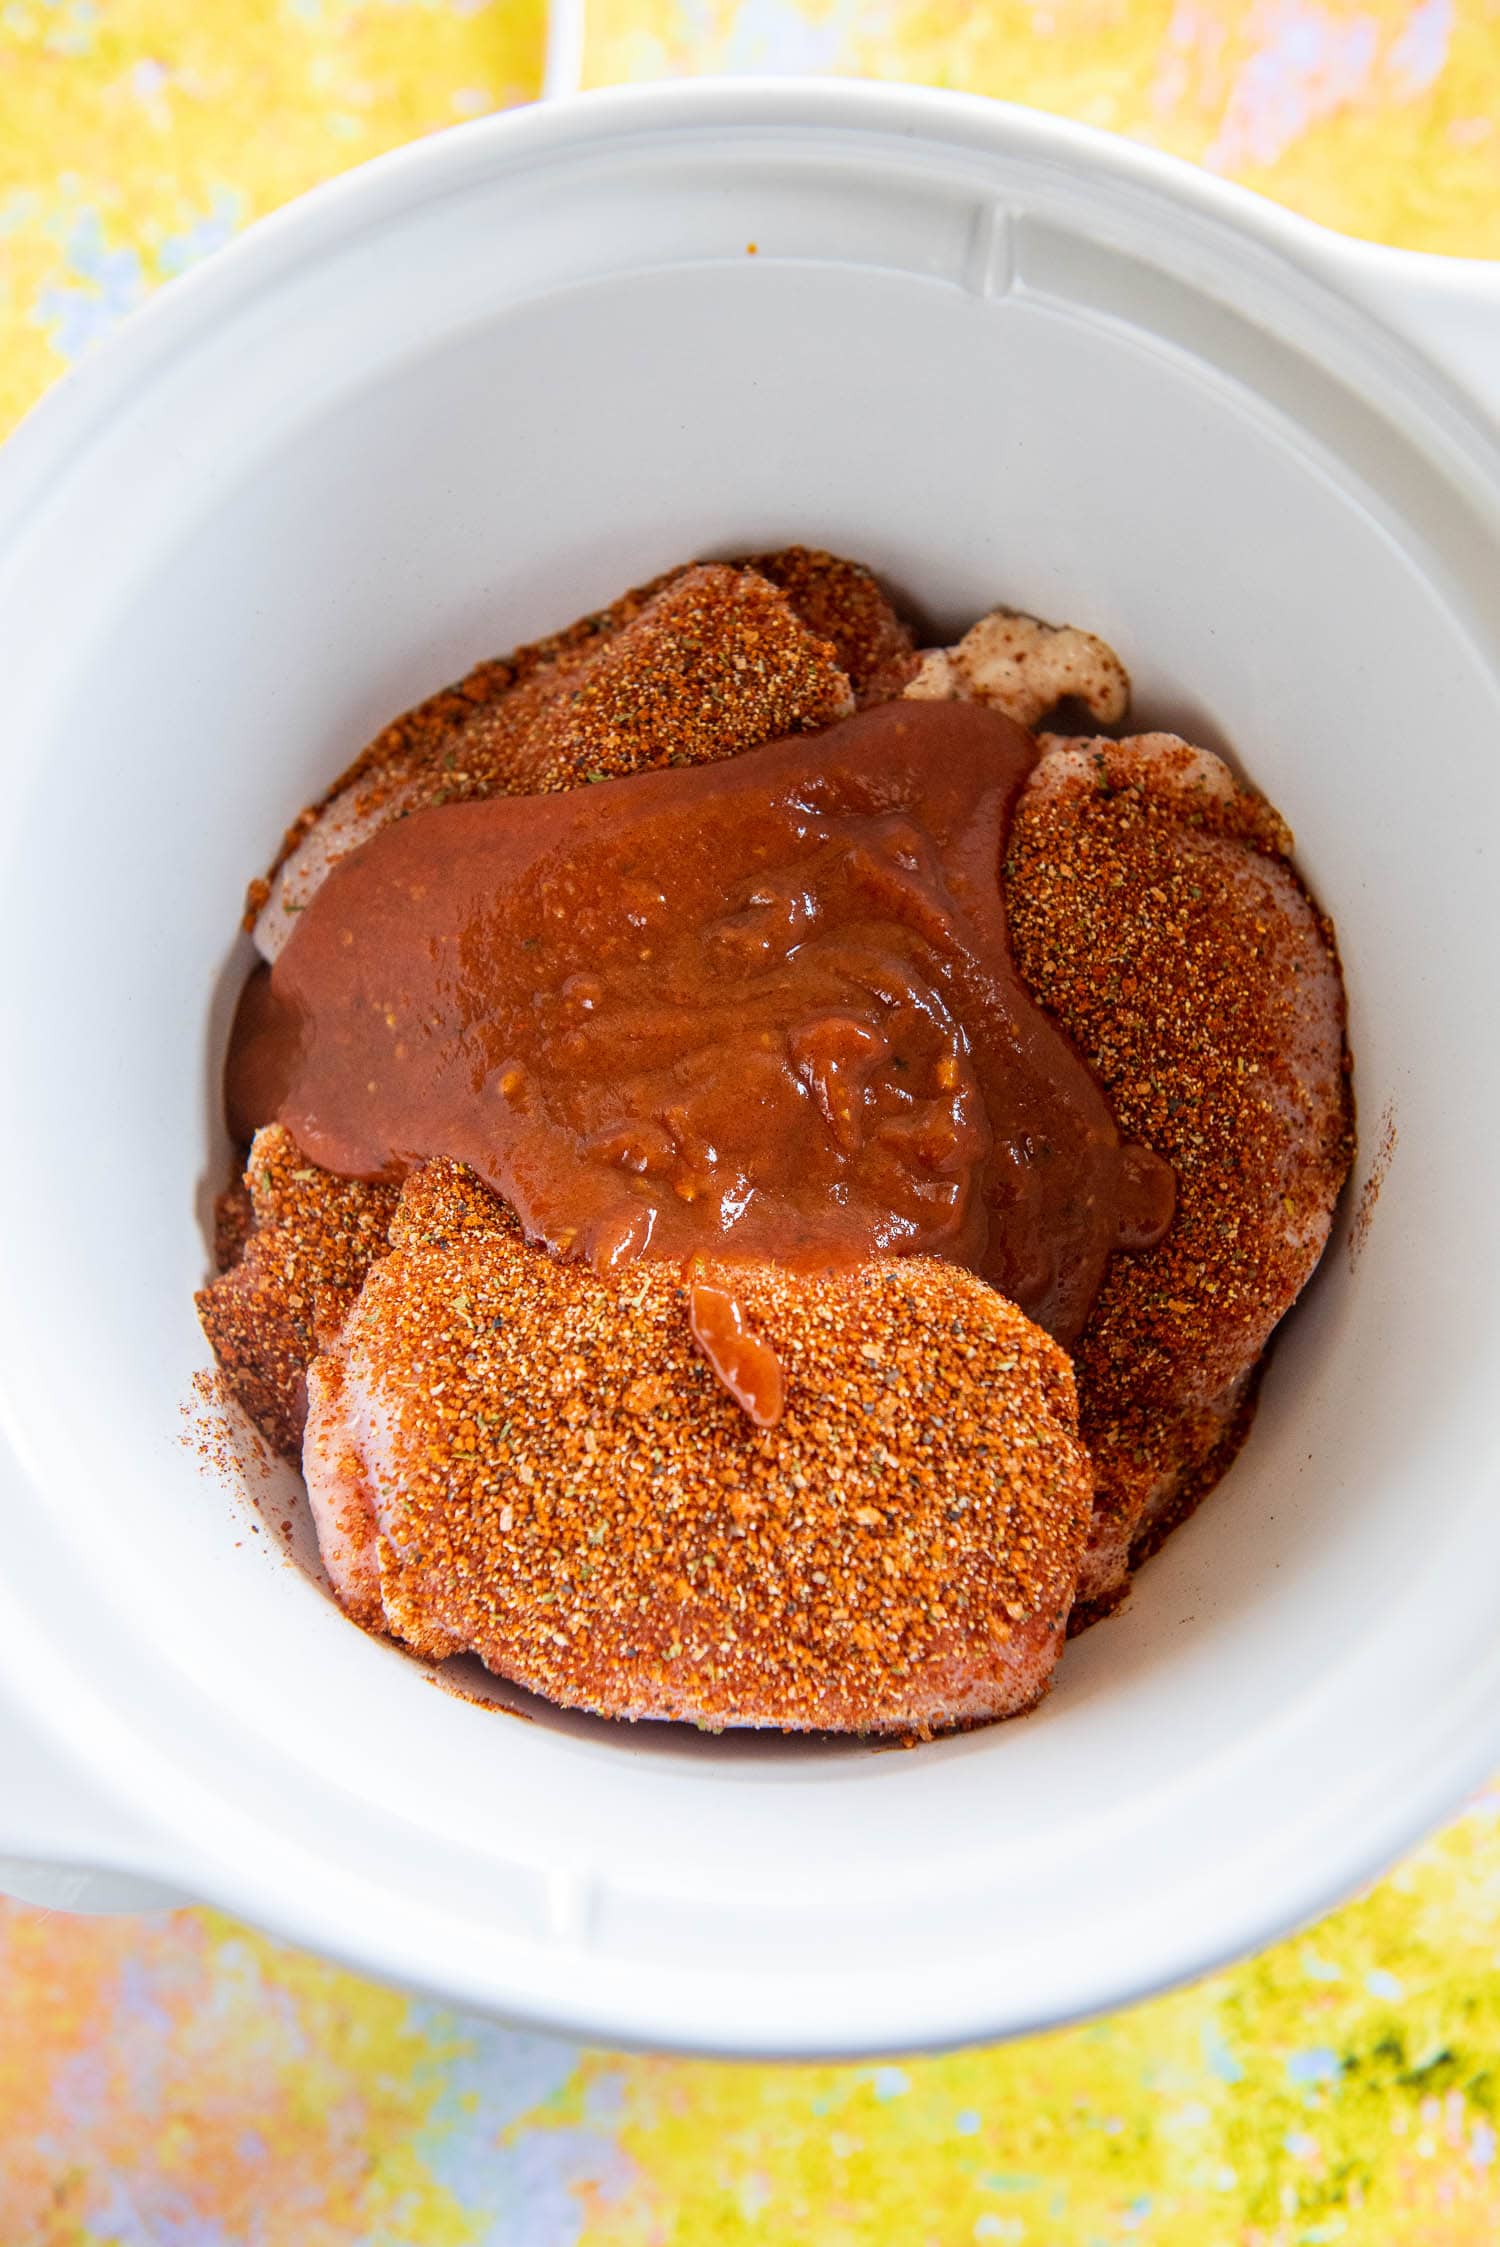 chicken with rub seasoning and bbq sauce in slow cooker